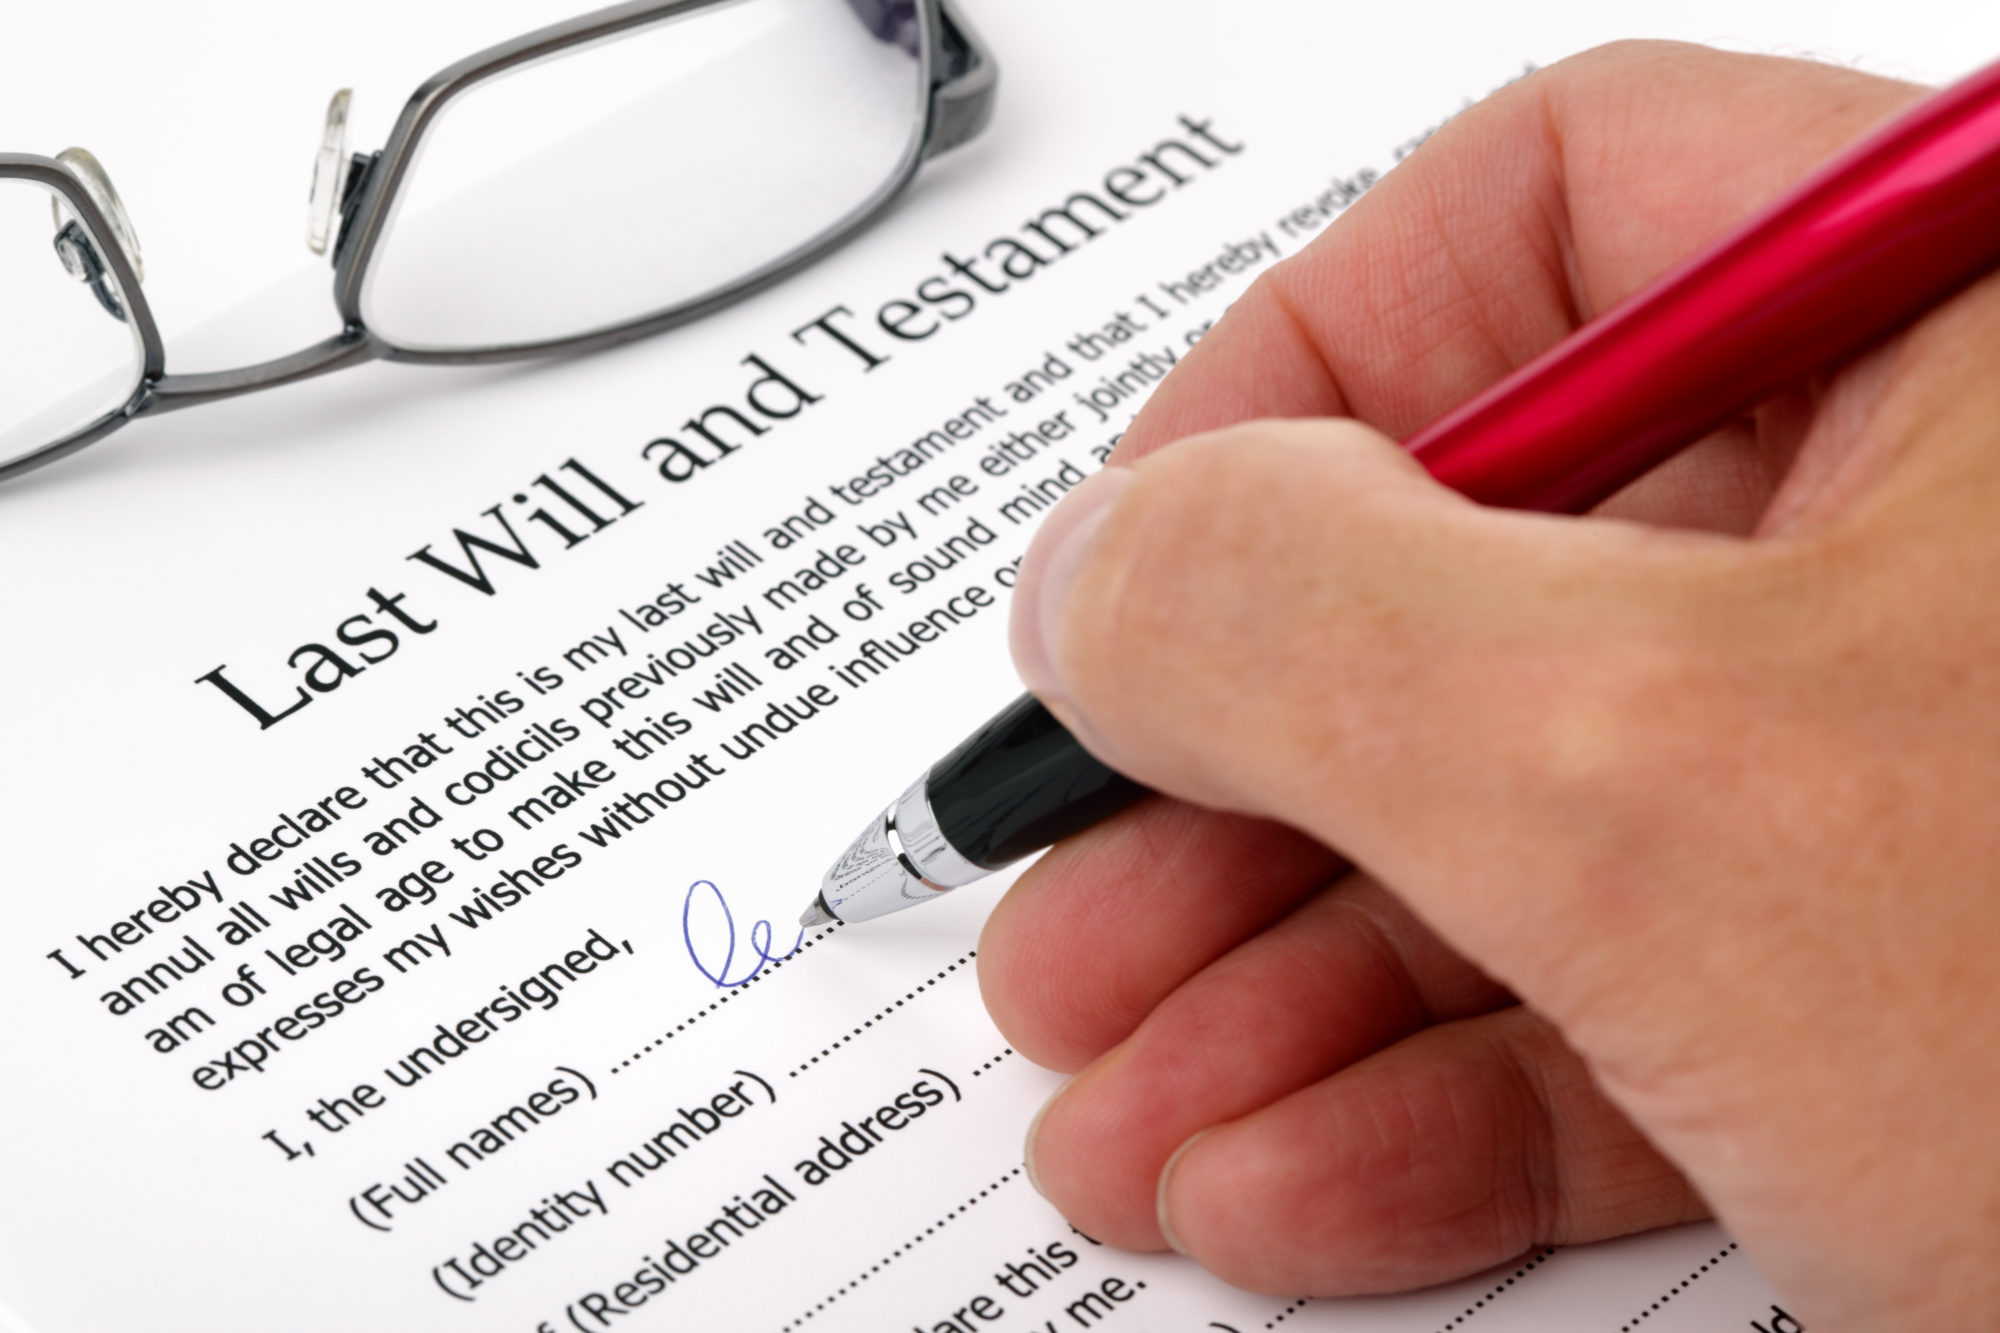 Understanding the Contents of a Will